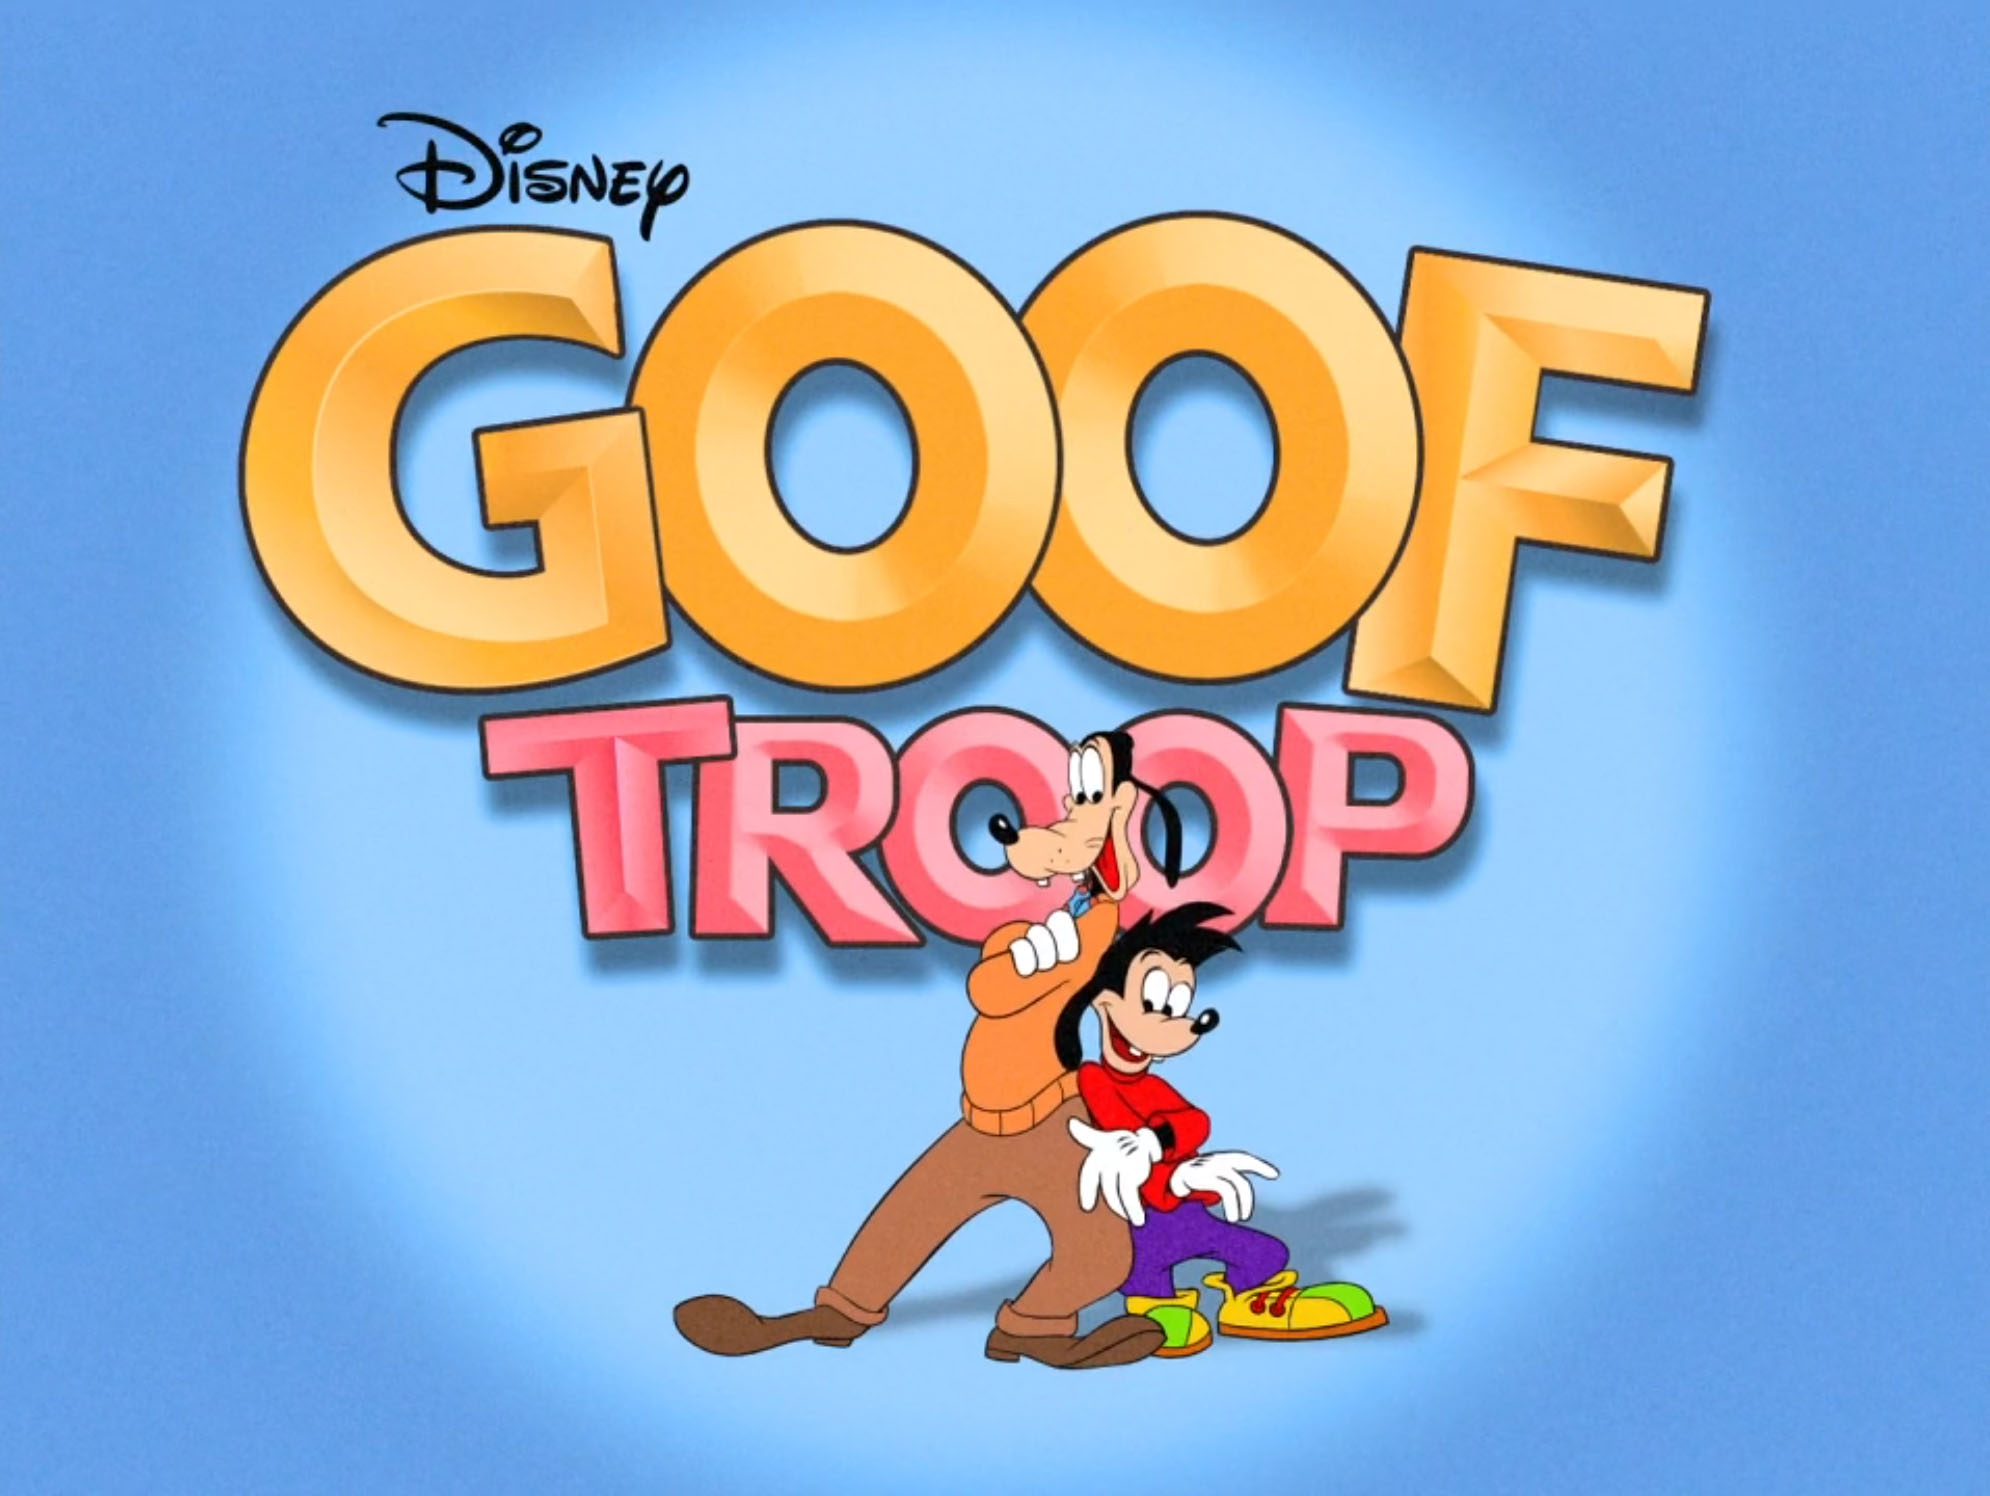 Agent 9. reccomend pete from goof troop wants